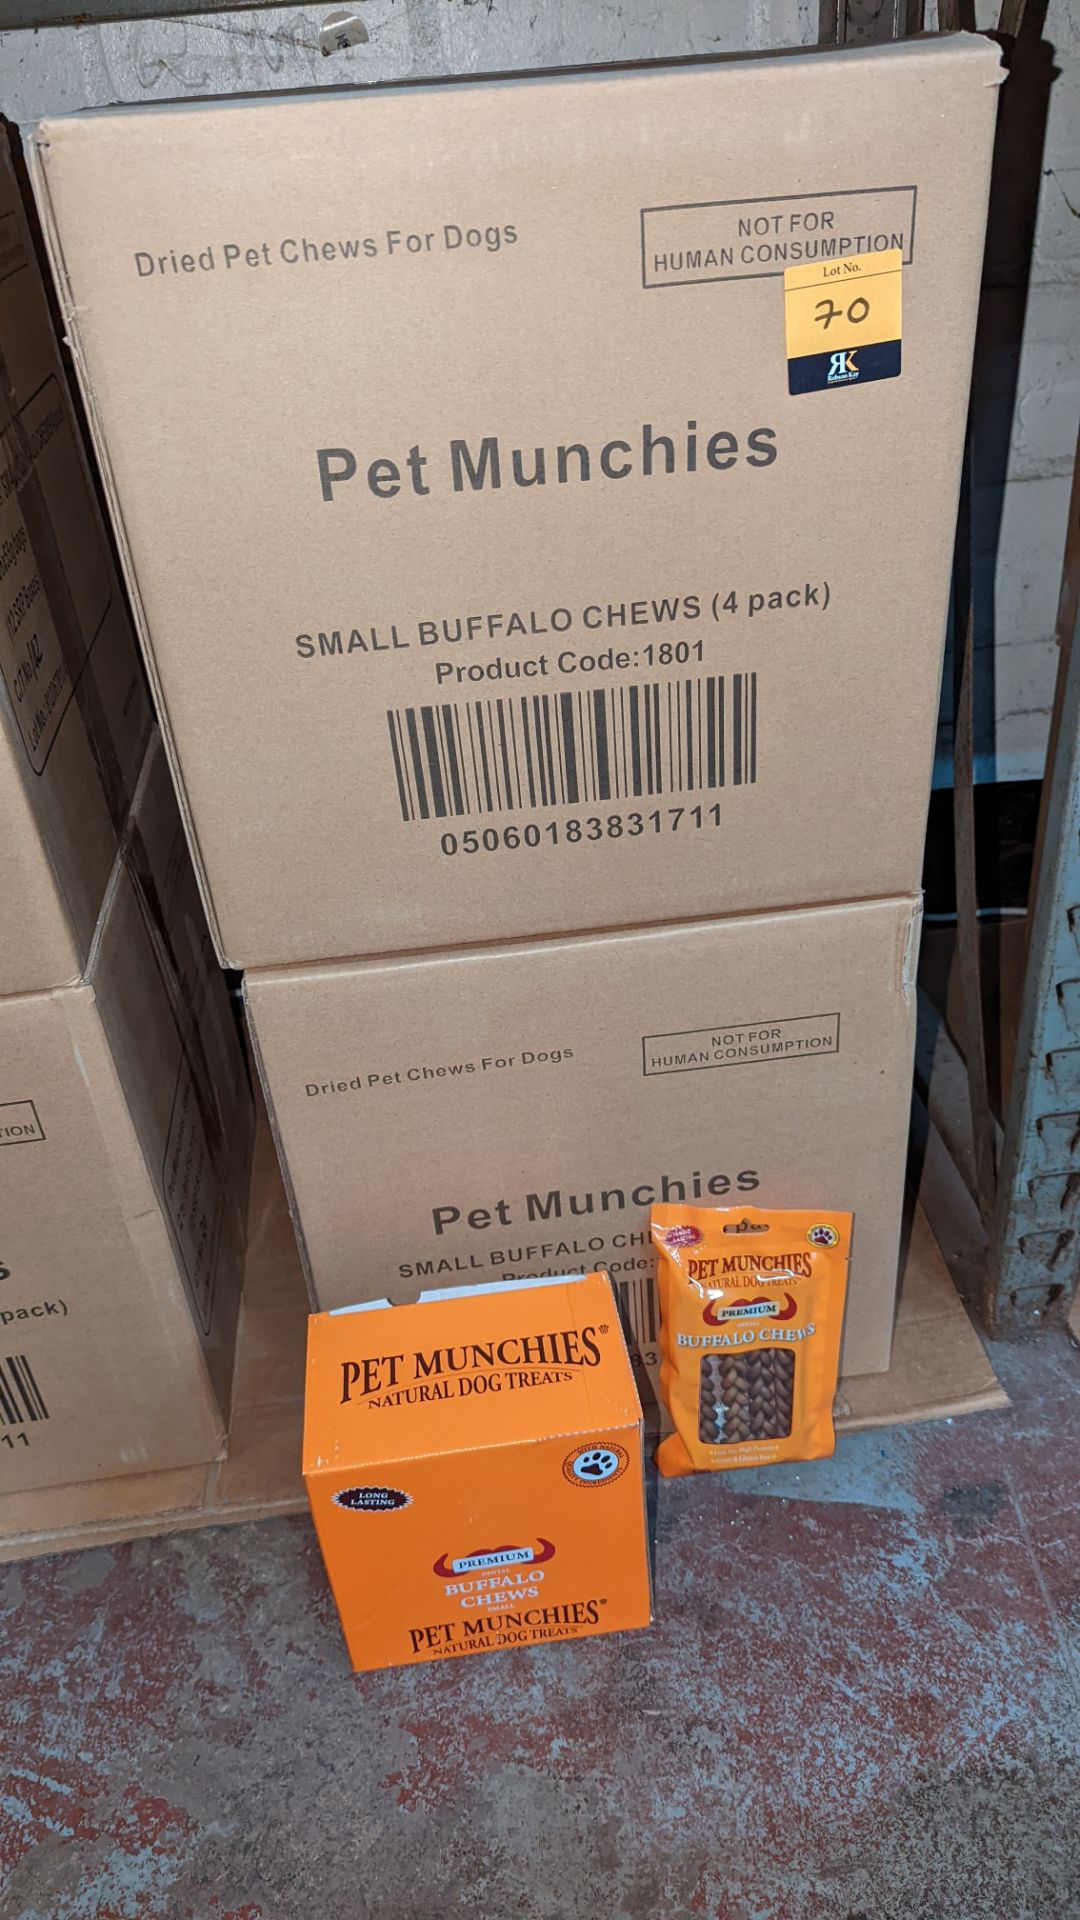 Pet Munchies dried pet chews for dogs. This lot consists of a total of 24 orange retail display box